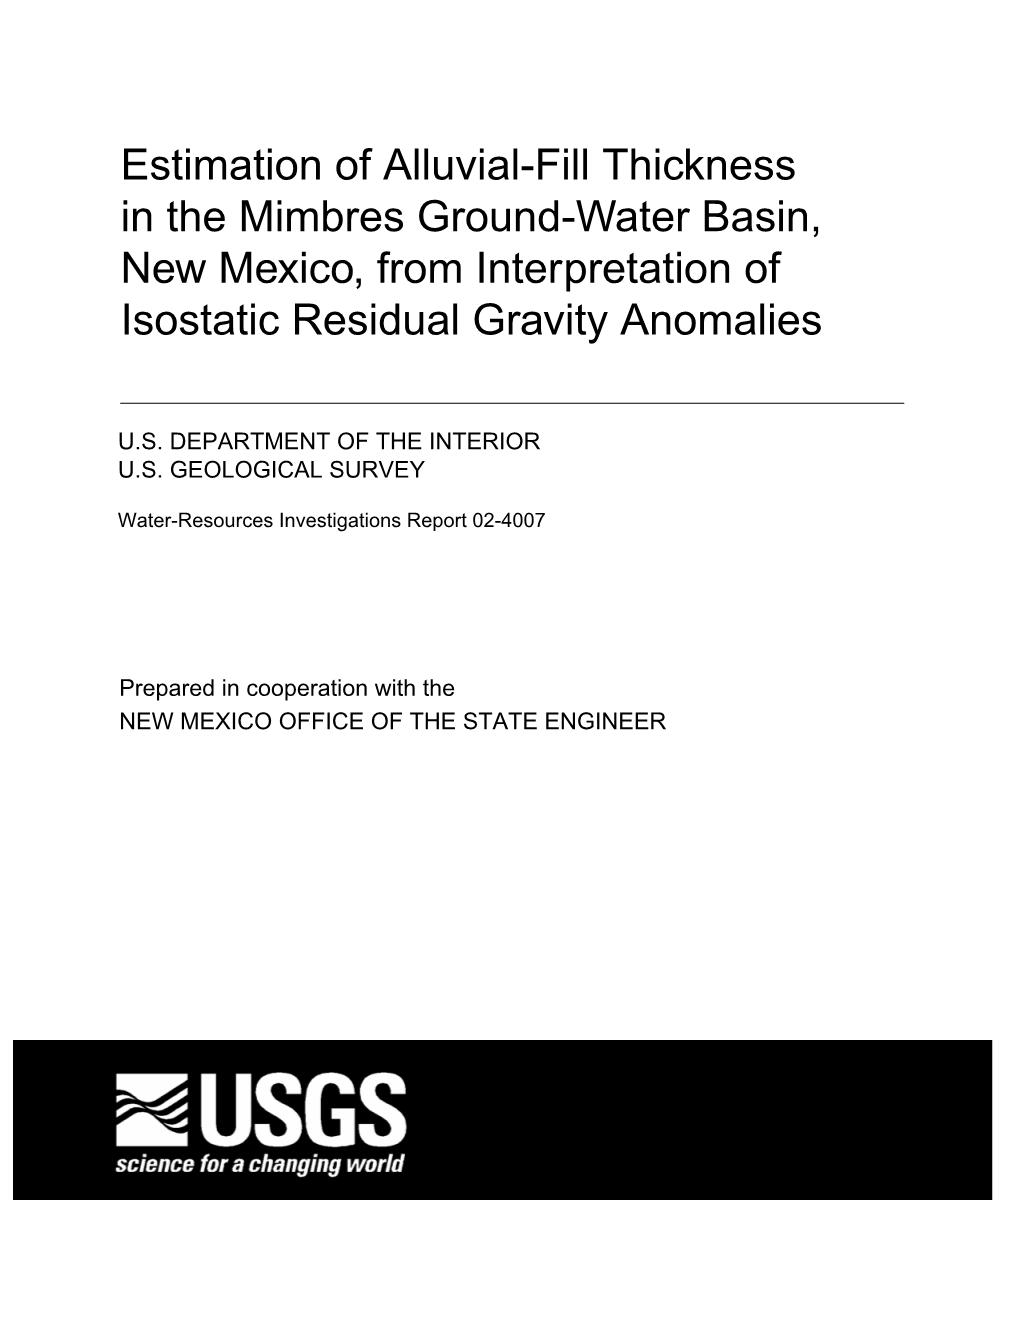 Estimation of Alluvial-Fill Thickness in the Mimbres Ground-Water Basin, New Mexico, from Interpretation of Isostatic Residual Gravity Anomalies